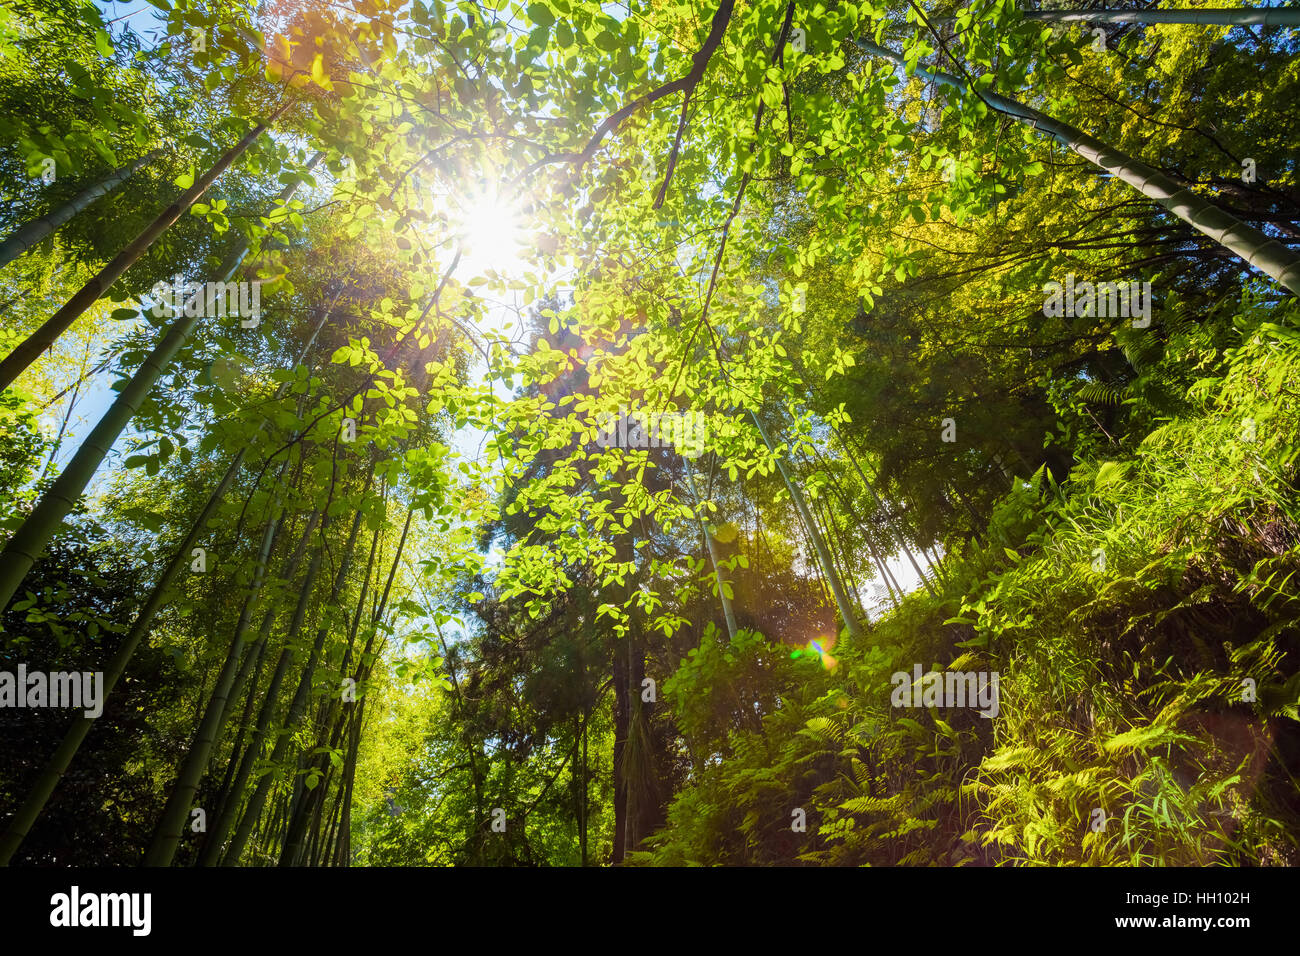 Spring Sun Shining Through Canopy Of Tall Trees Bamboo Woods. Sunlight In Tropical Forest, Summer Nature. Upper Branches Of Different Deciduous Trees Stock Photo